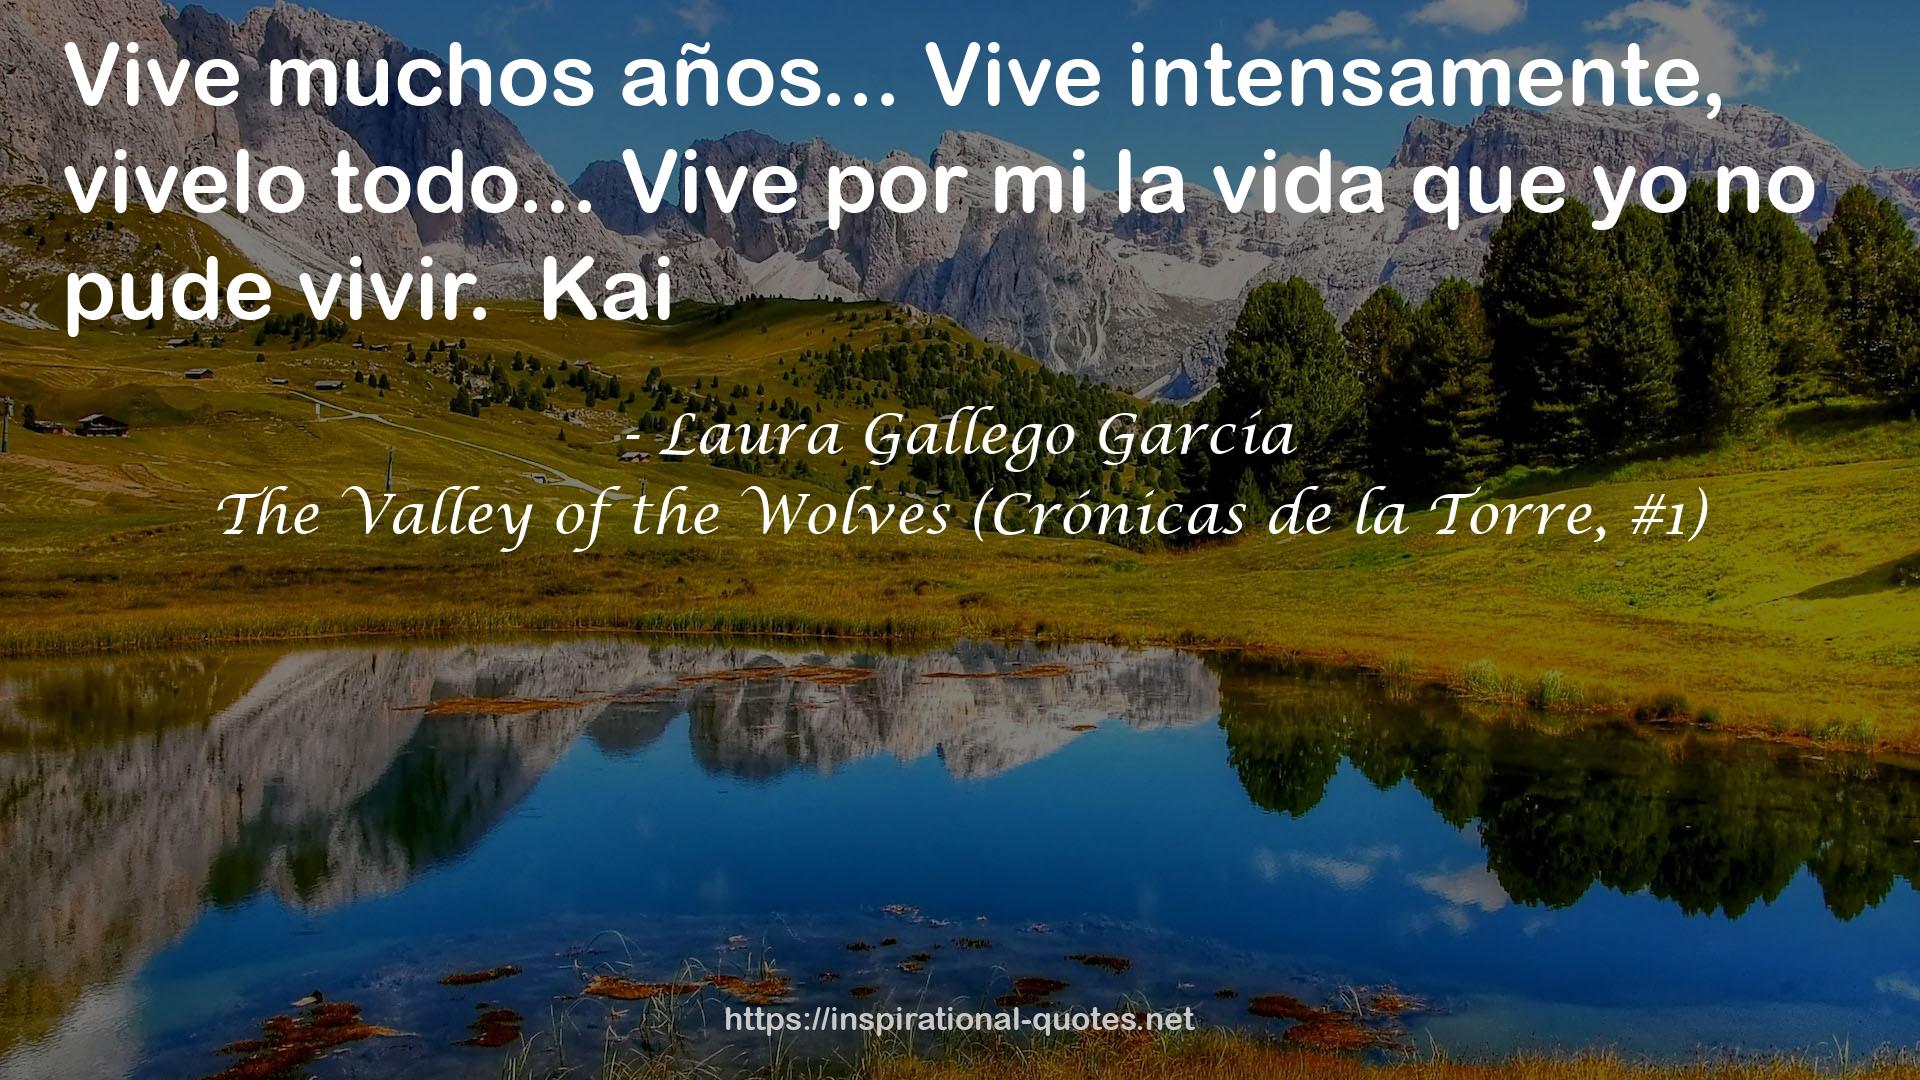 The Valley of the Wolves (Crónicas de la Torre, #1) QUOTES